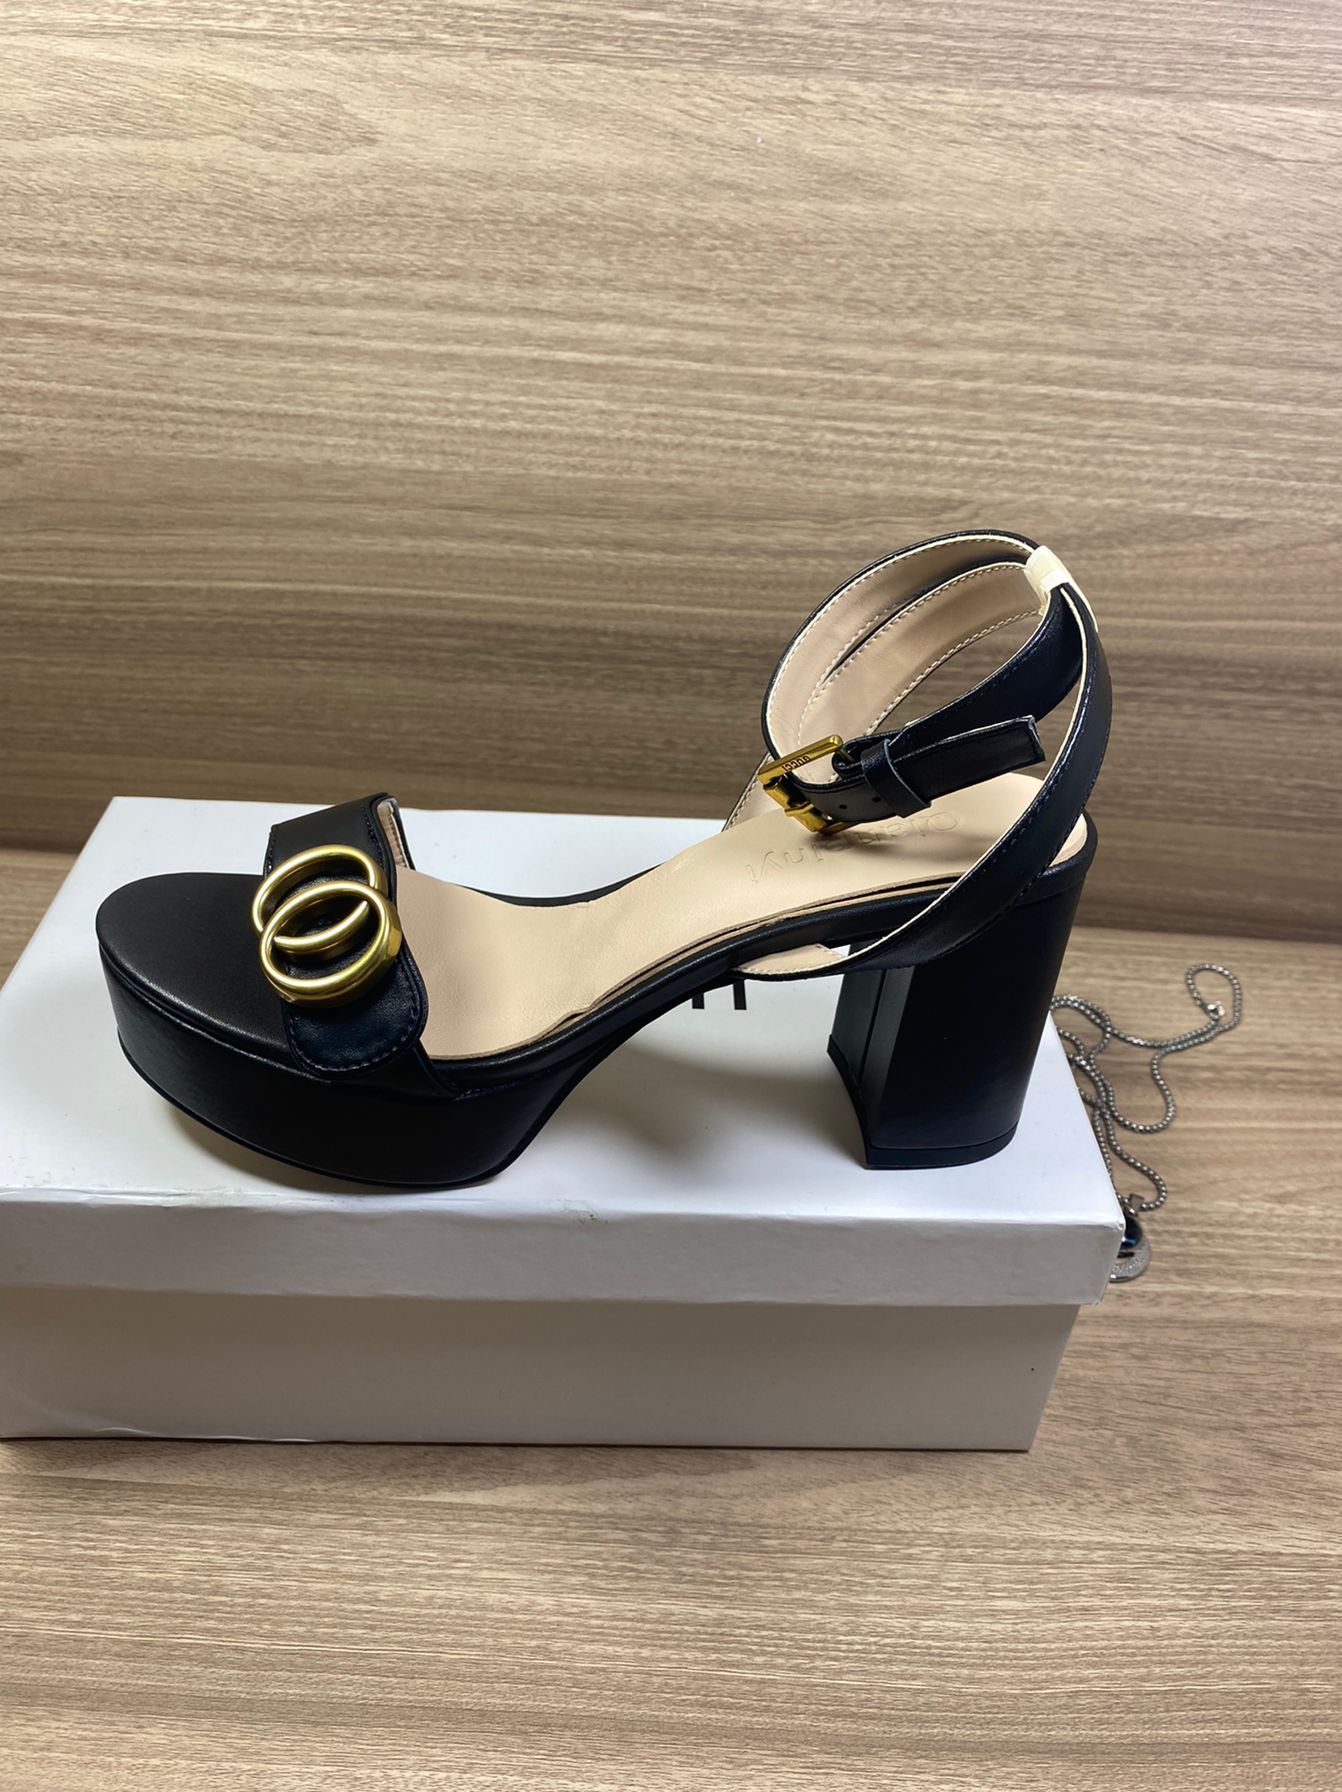 designer shoes womens Sandals Formal sandal Thick heeled high heels 100% leather party Dance shoe Lady Metal Belt buckle High Heel Woman shoes Large size 35-42 With box